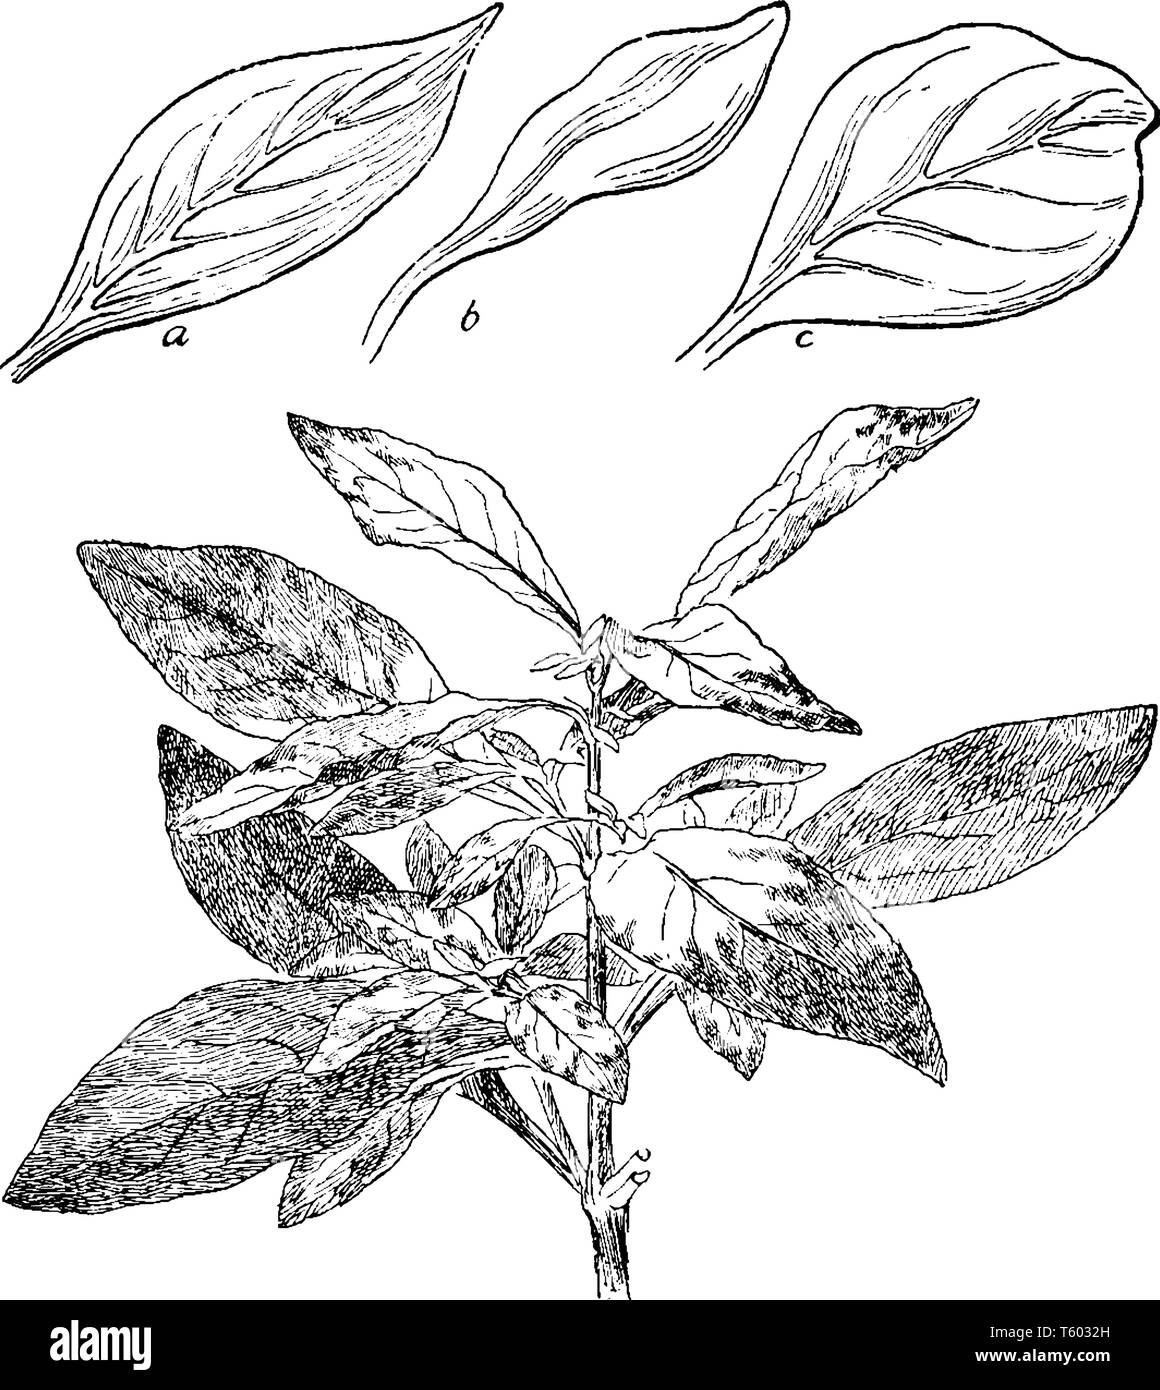 A picture shows Telanthera Amoena Plant Leaves. This Shrub belongs to the Alternanthera genus. Leaf a is wet leaf, leaf b is dry leaf and leaf c is fl Stock Vector